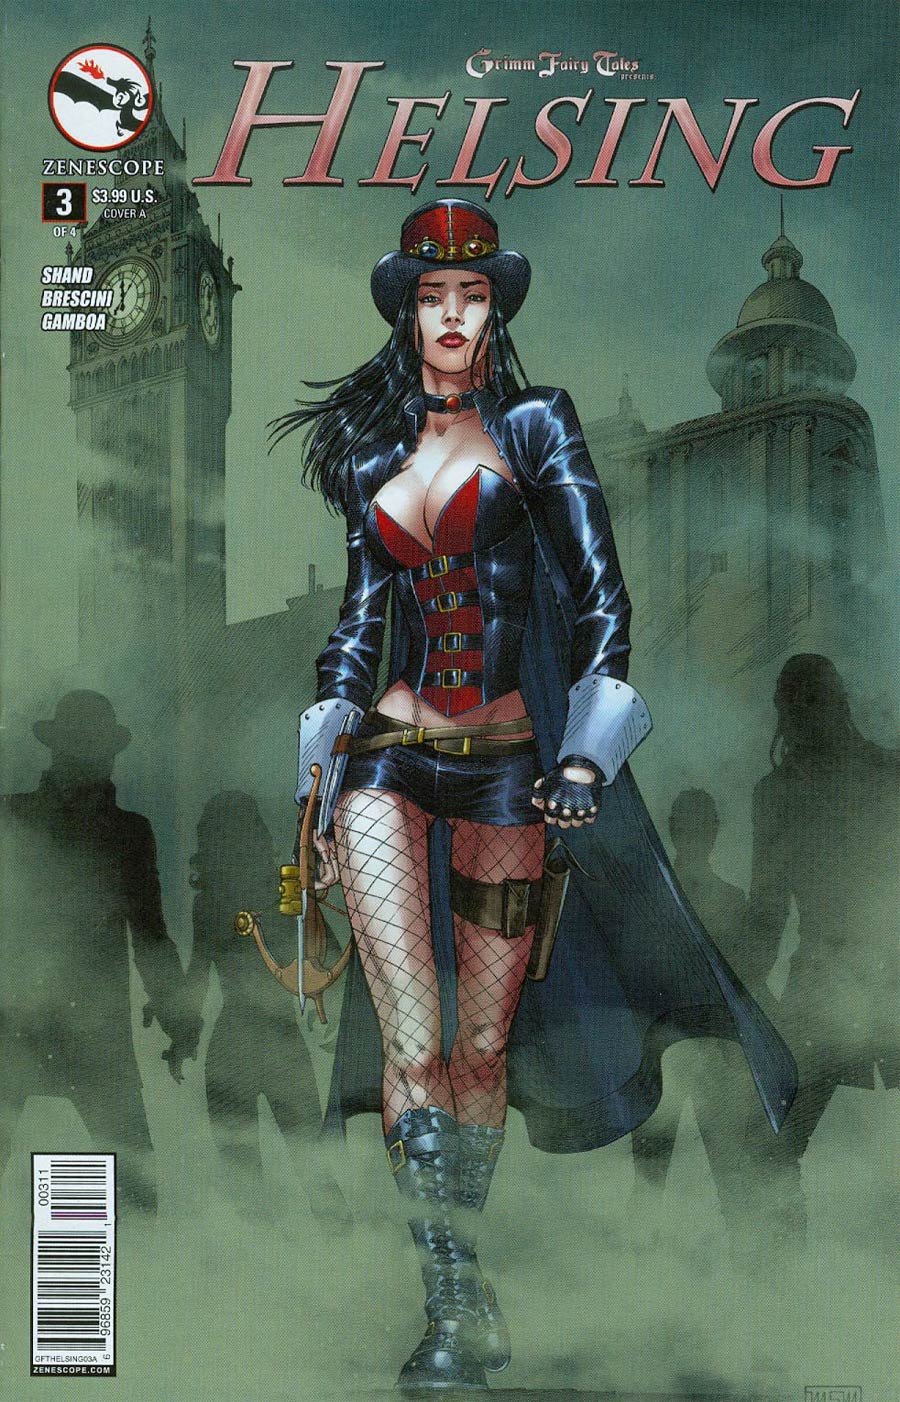 Grimm Fairy Tales Presents Helsing #3 Cover A Mike S Miller